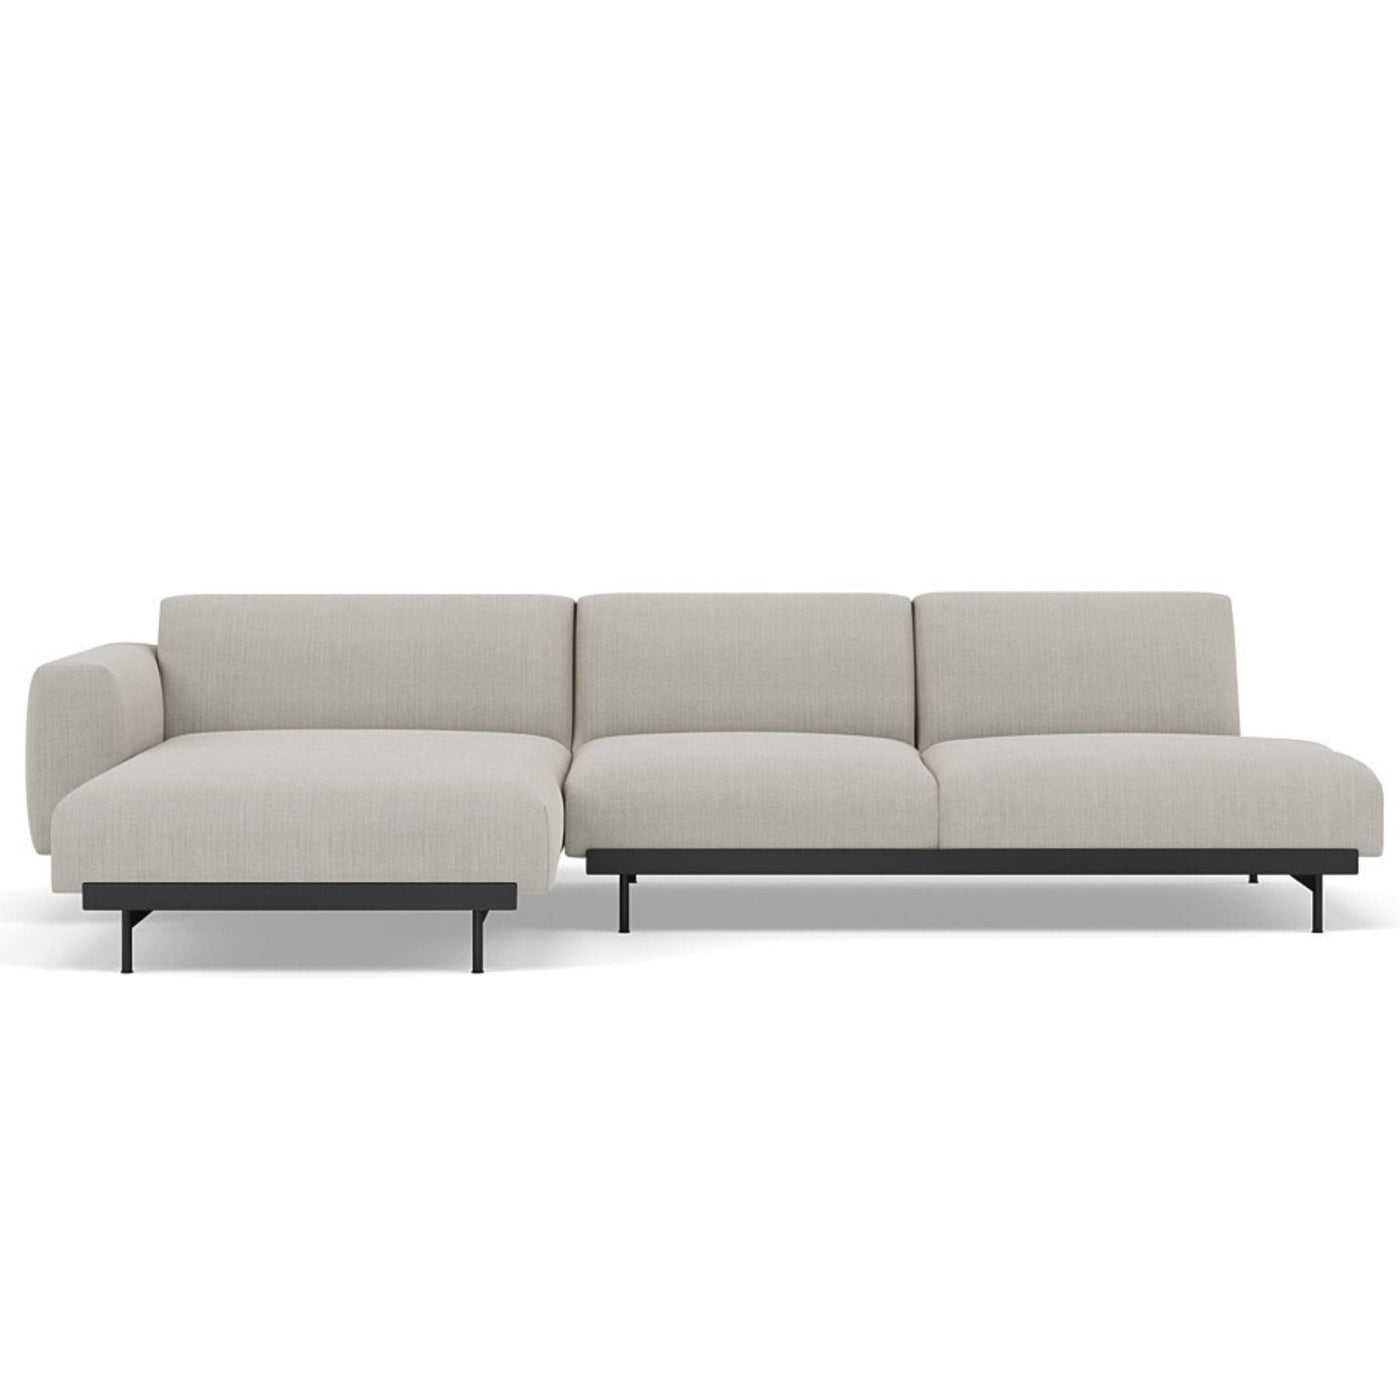 Muuto In Situ Modular 3 Seater Sofa, configuration 9. Made to order from someday designs. #colour_fiord-201